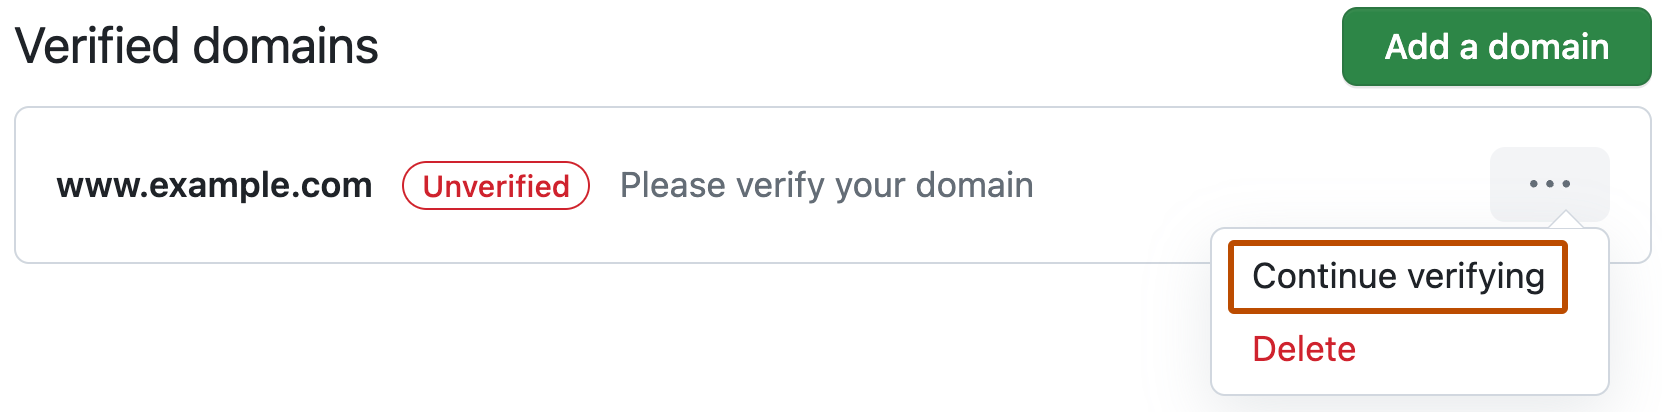 Screenshot of GitHub Pages settings showing verified domains. Under the horizontal kebab icon to the right, the "Continue verifying" dropdown option is outlined in dark orange.